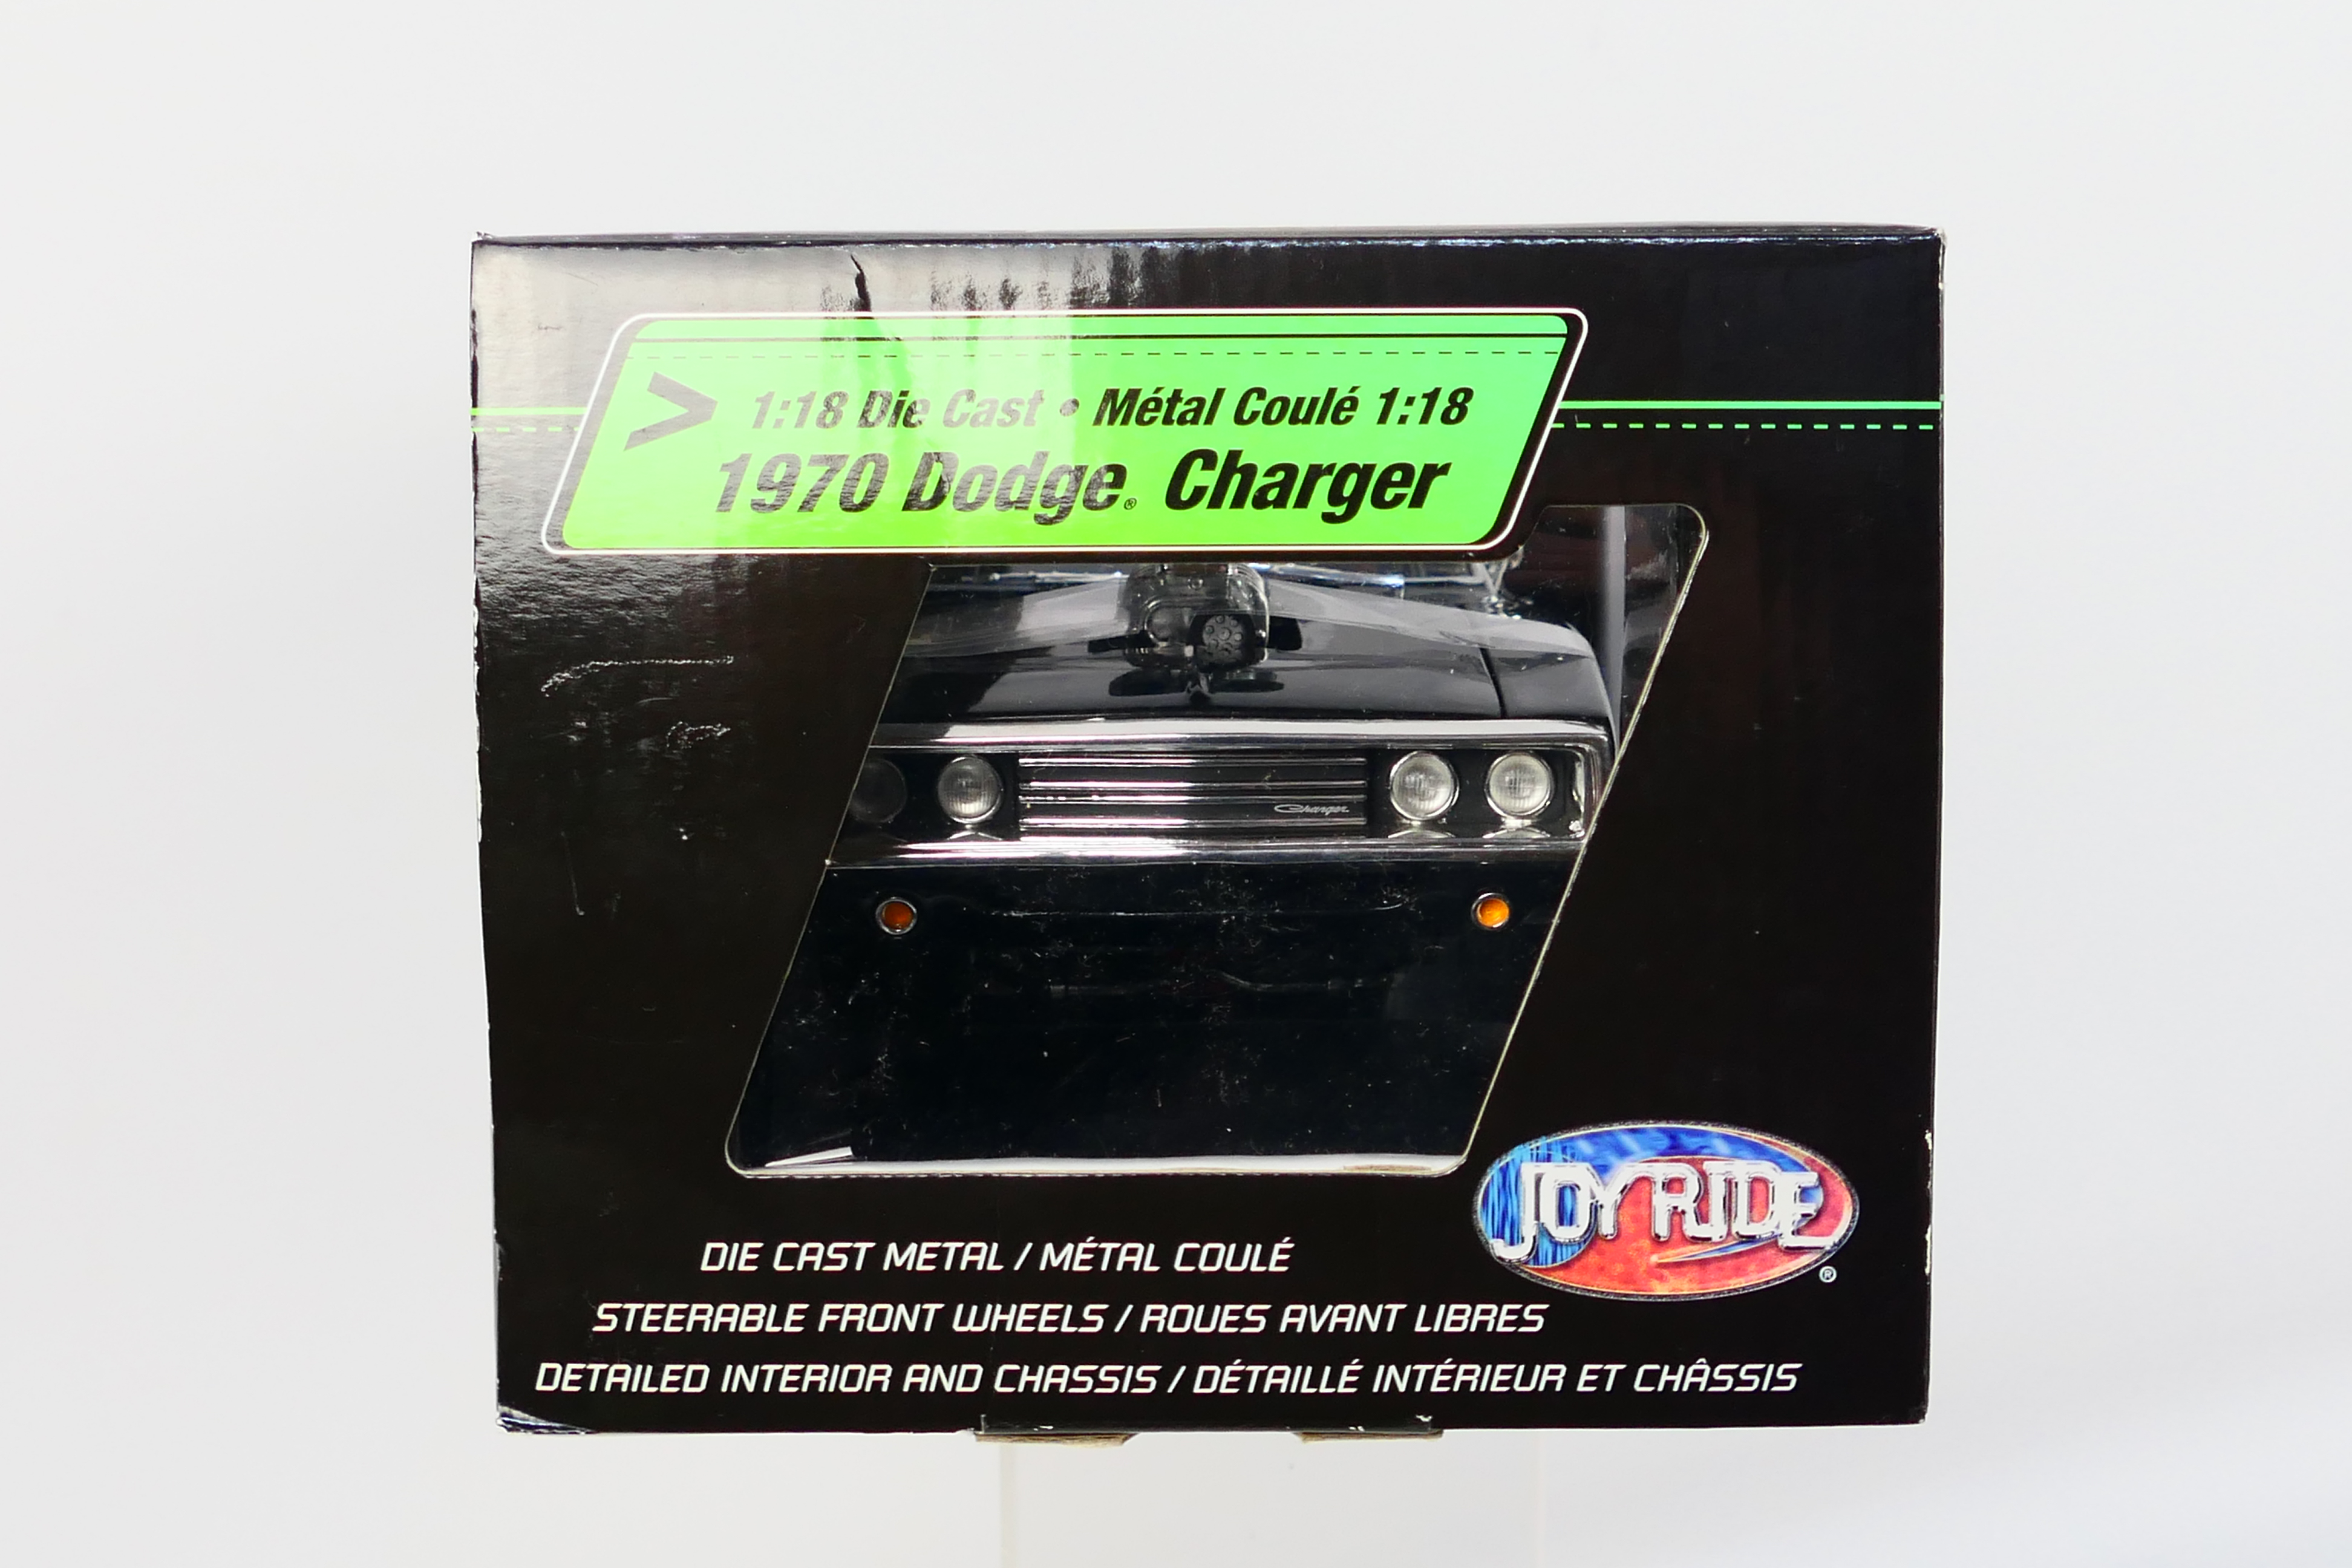 Joyride - A boxed Joyride #36973 1:18 scale 'The Fast & The Furious' 1970 Dodge Charger. - Image 2 of 4